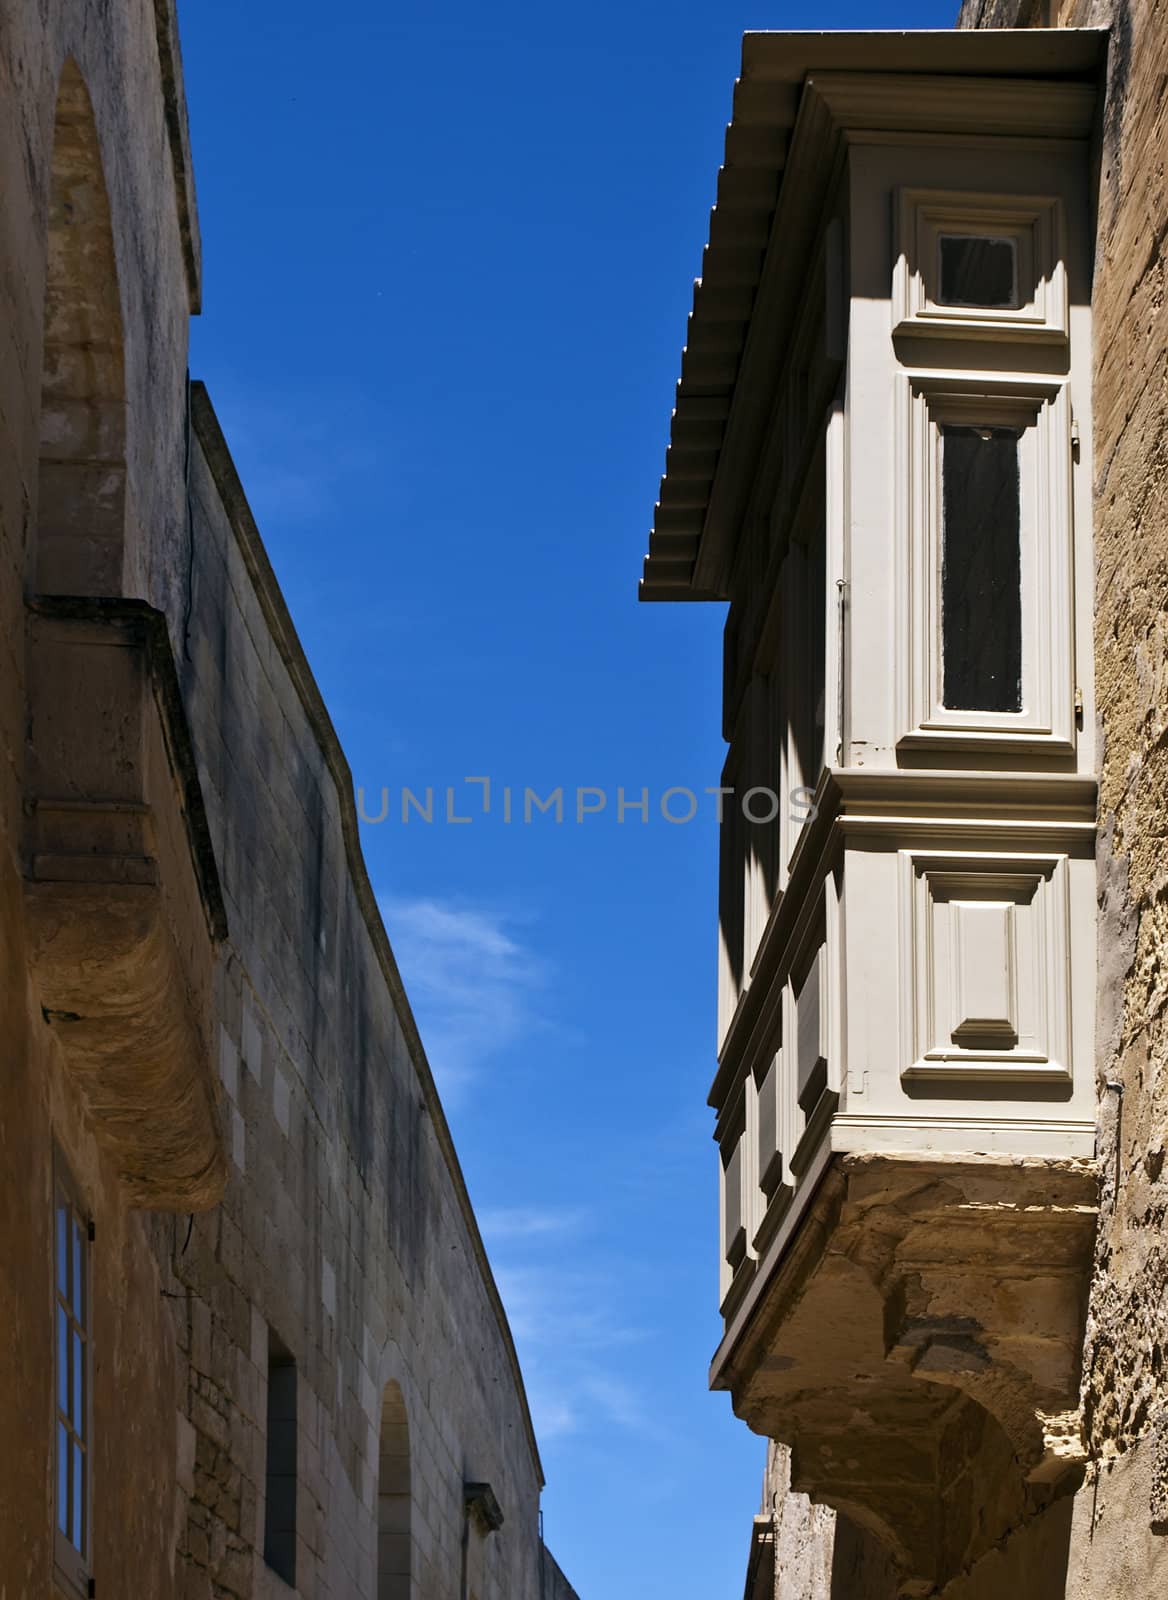 The traditional Maltese wooden balcony is a very common sight in Malta